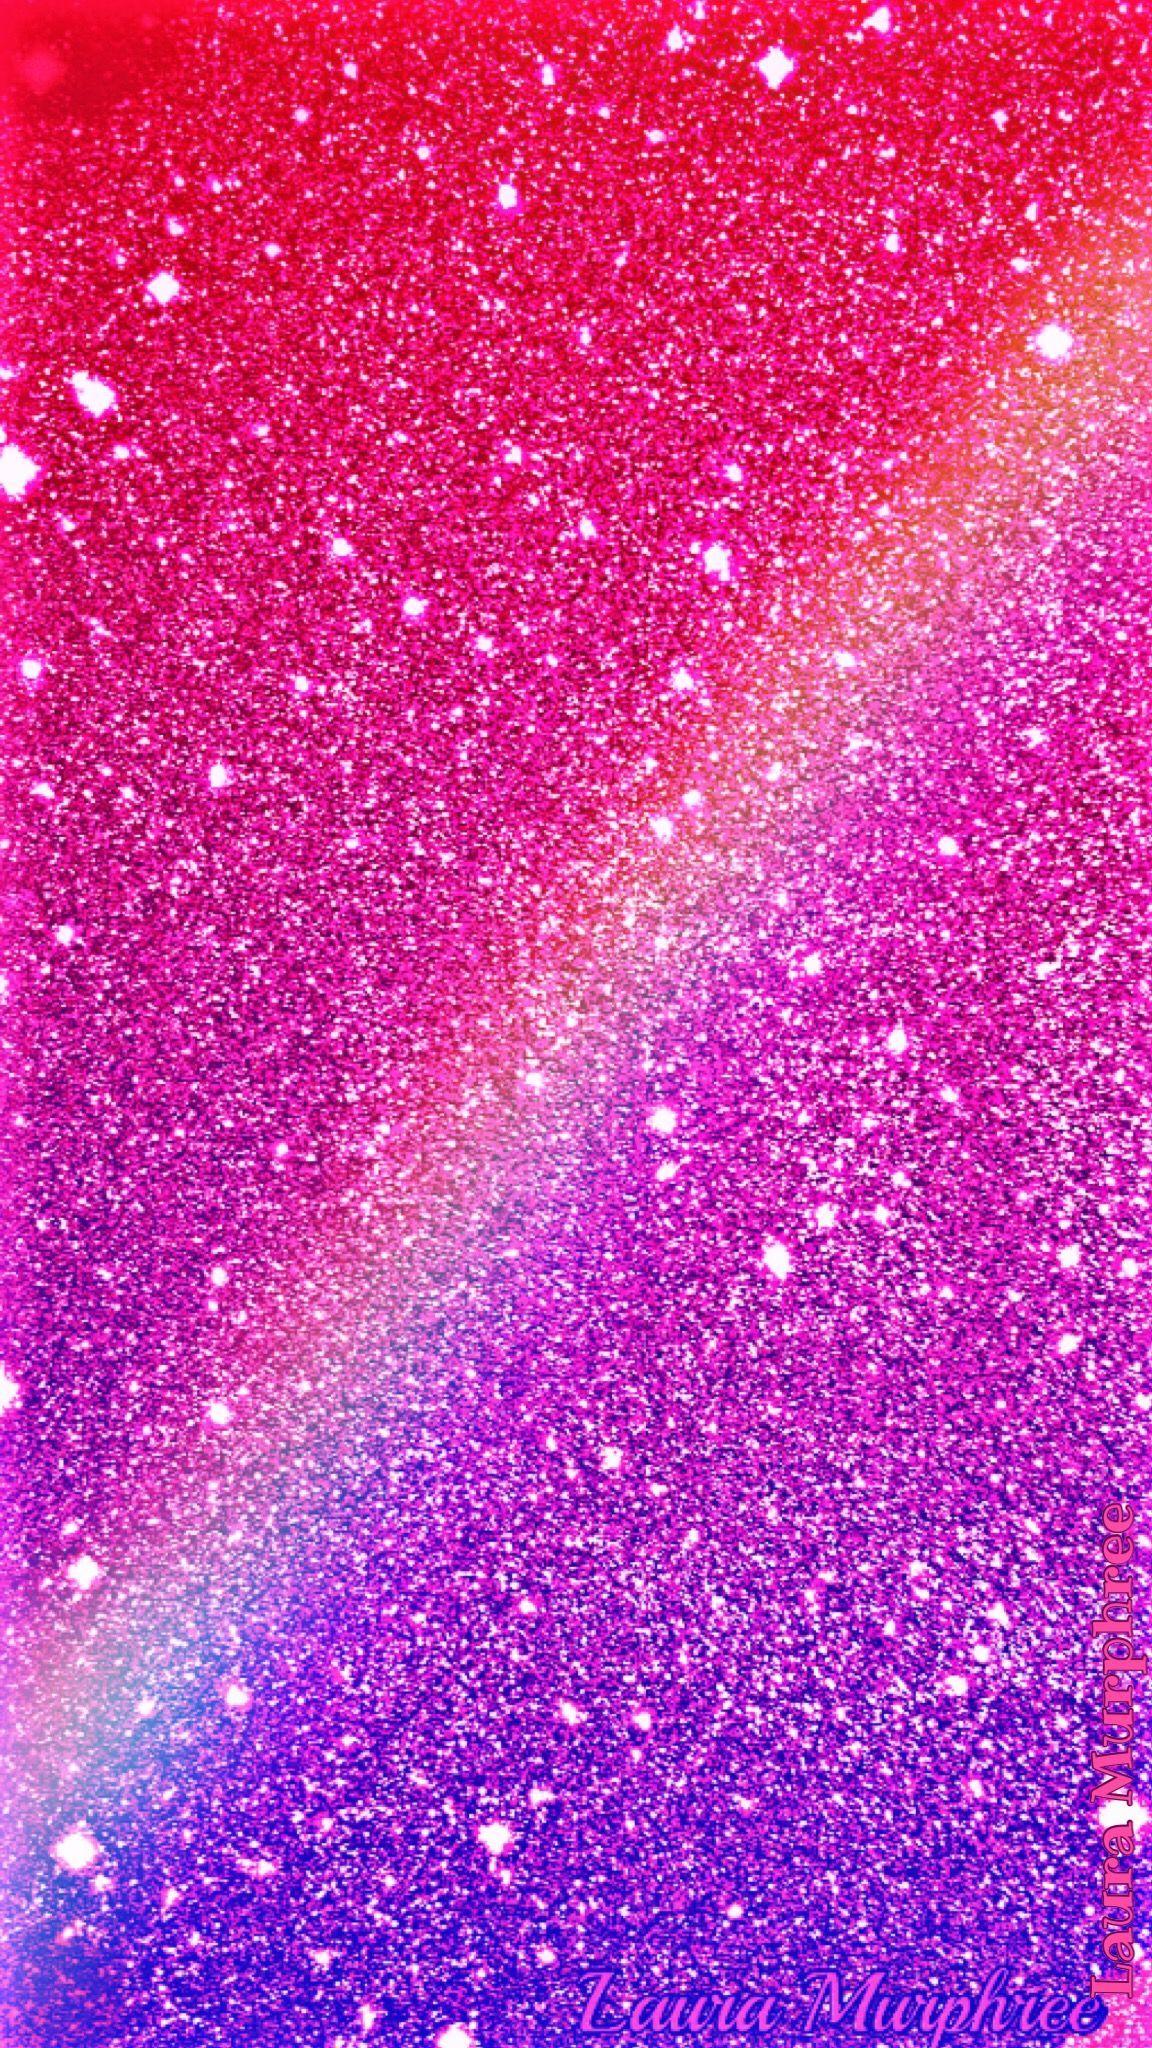 Sparkly Pink Glitter Background Hd / Hd & 4k quality ...